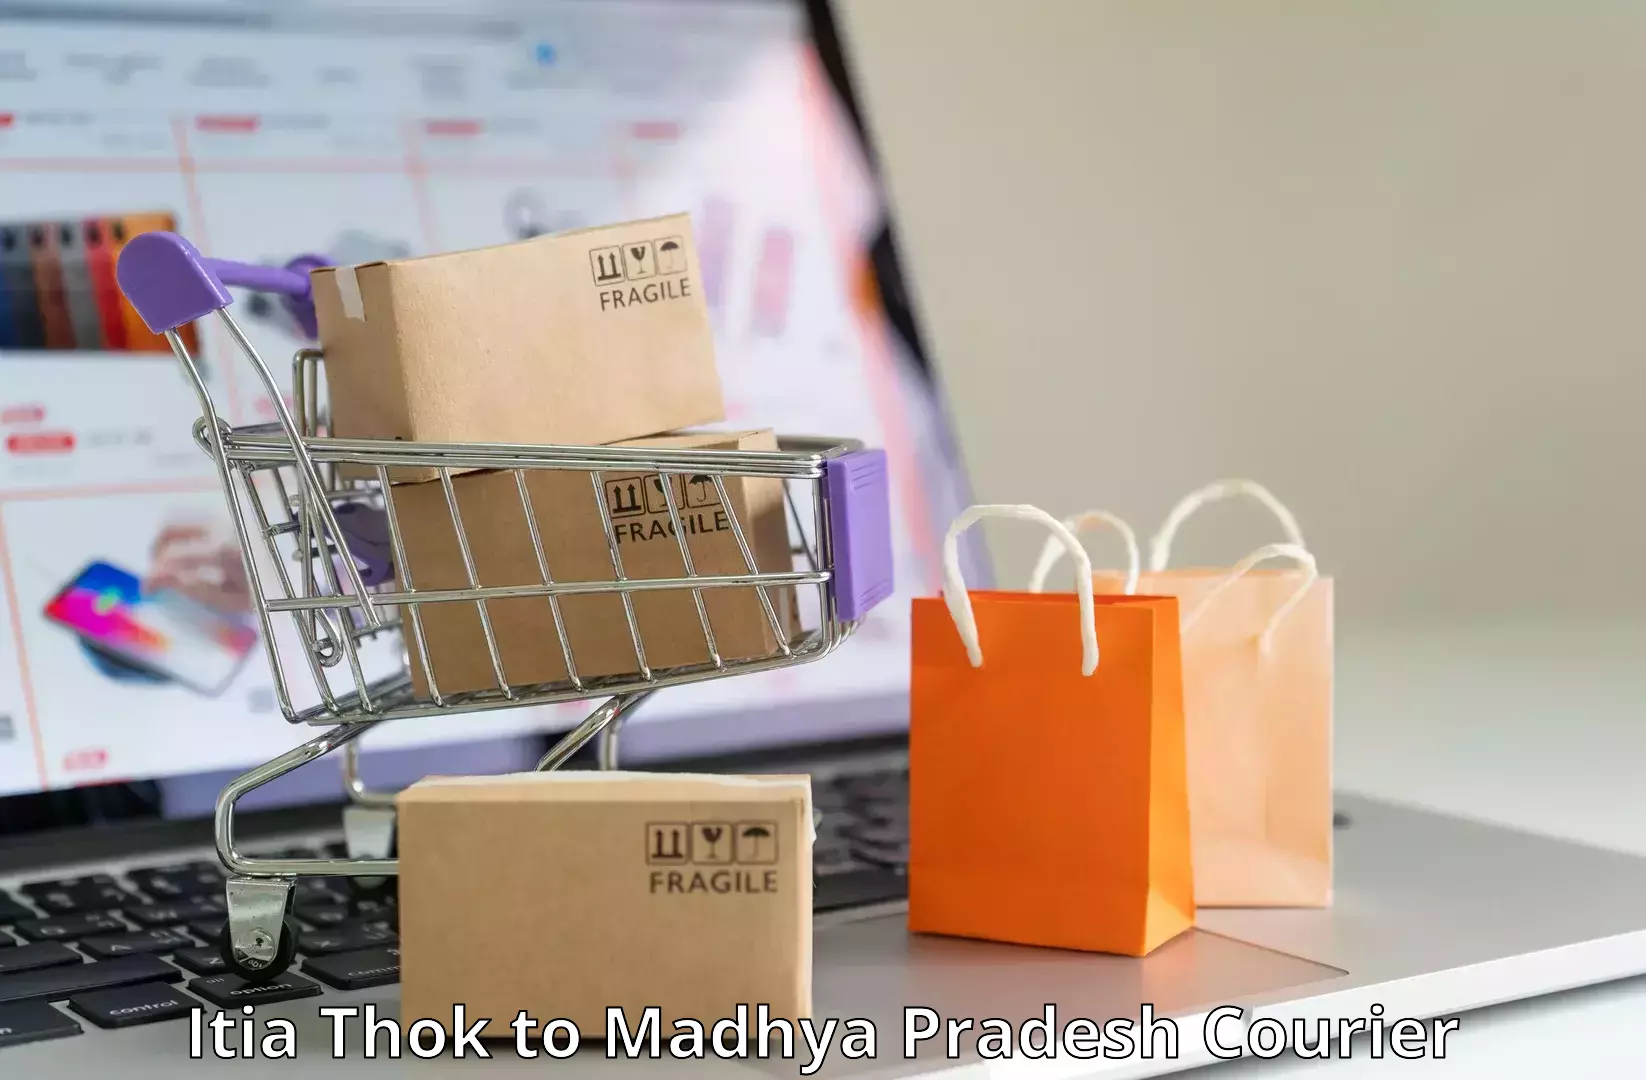 Courier service booking in Itia Thok to Madhya Pradesh